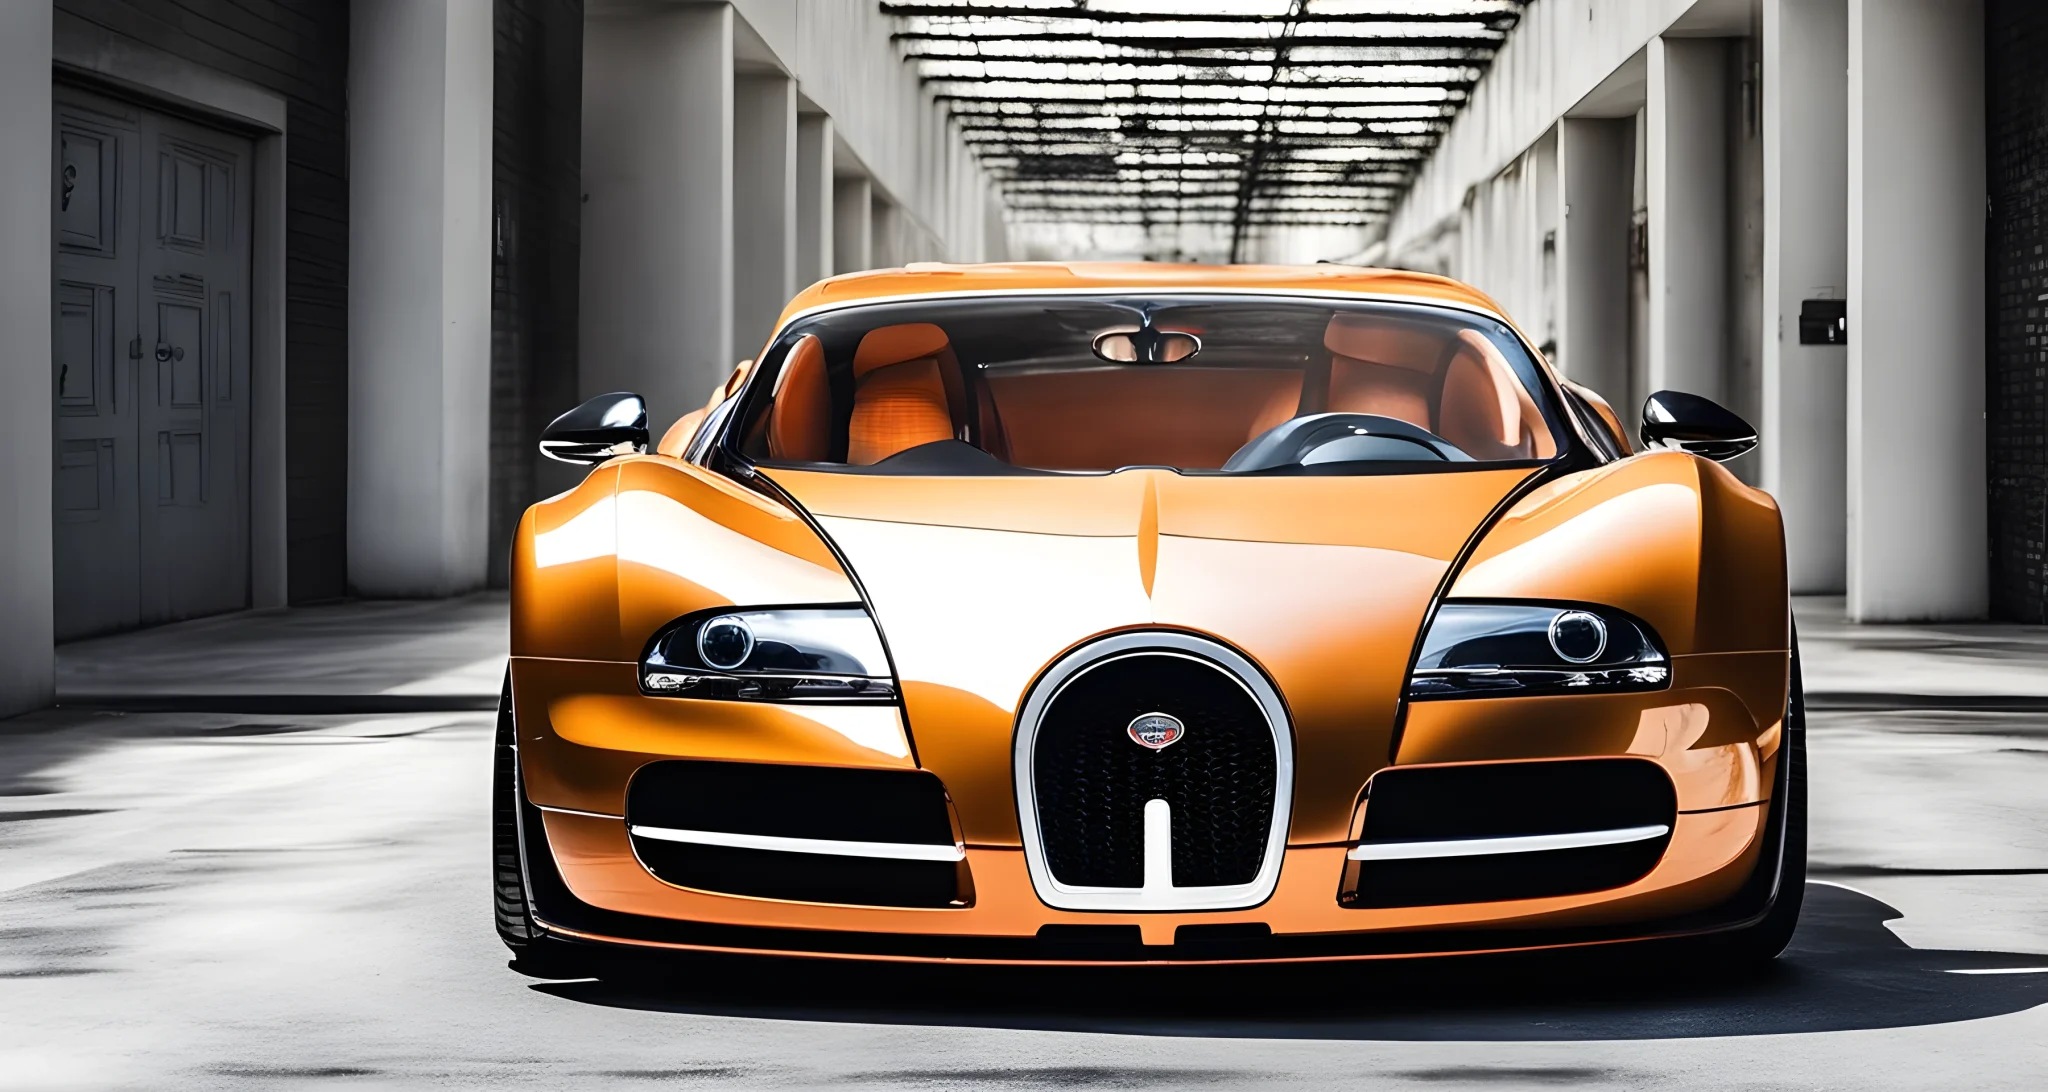 The image shows a customized Bugatti Veyron with a unique body kit and aerodynamic enhancements. The car also features a bespoke interior with custom upholstery and carbon fiber accents.